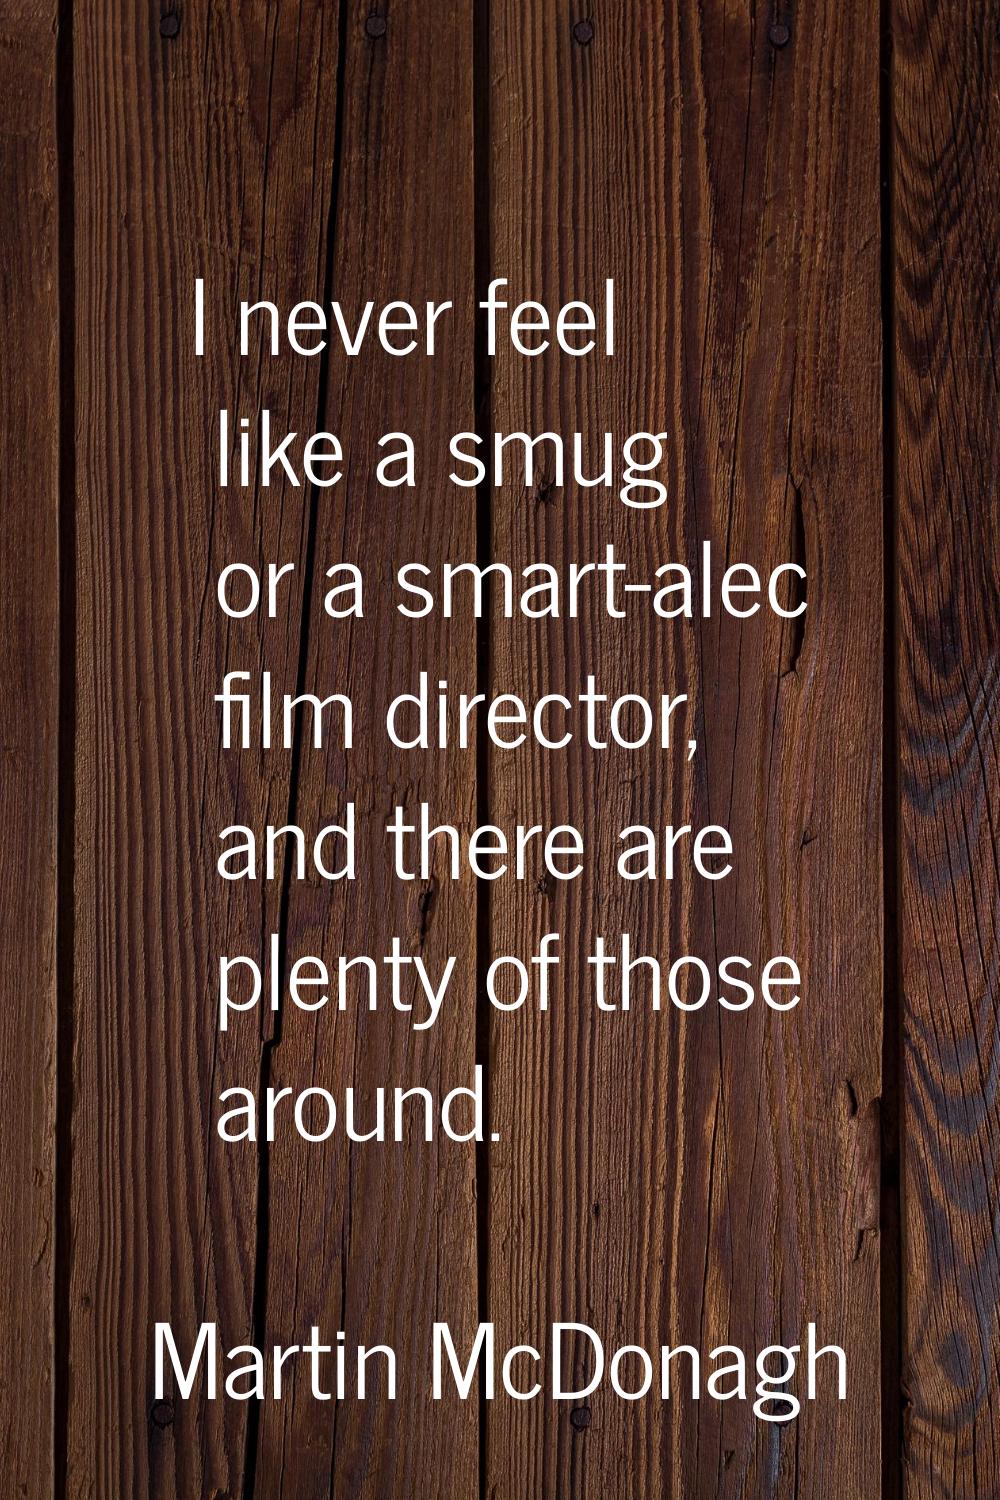 I never feel like a smug or a smart-alec film director, and there are plenty of those around.